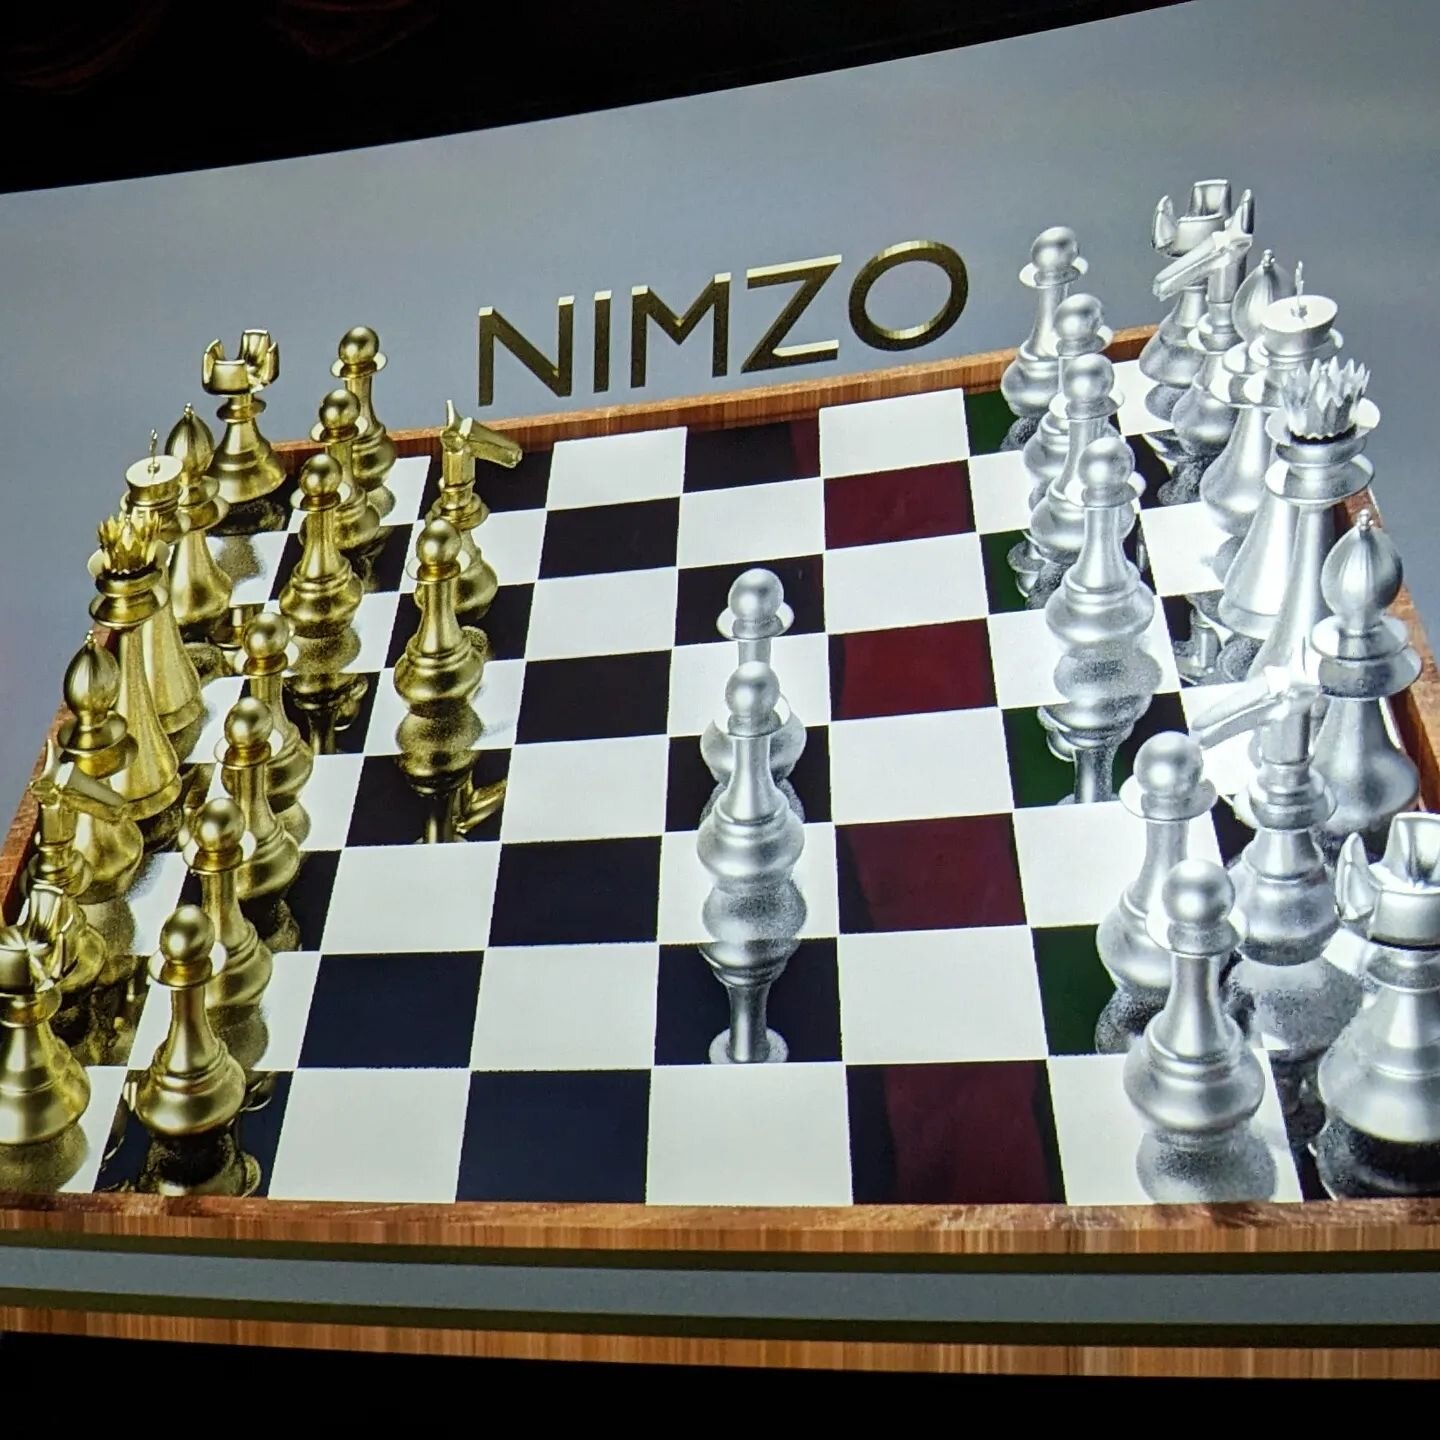 This is one of my favorite chess openings. @bern_after_reading Your graphics looked so sick on the big screen #chess #kingchess #chesscom #graphics #openings #chessopenings